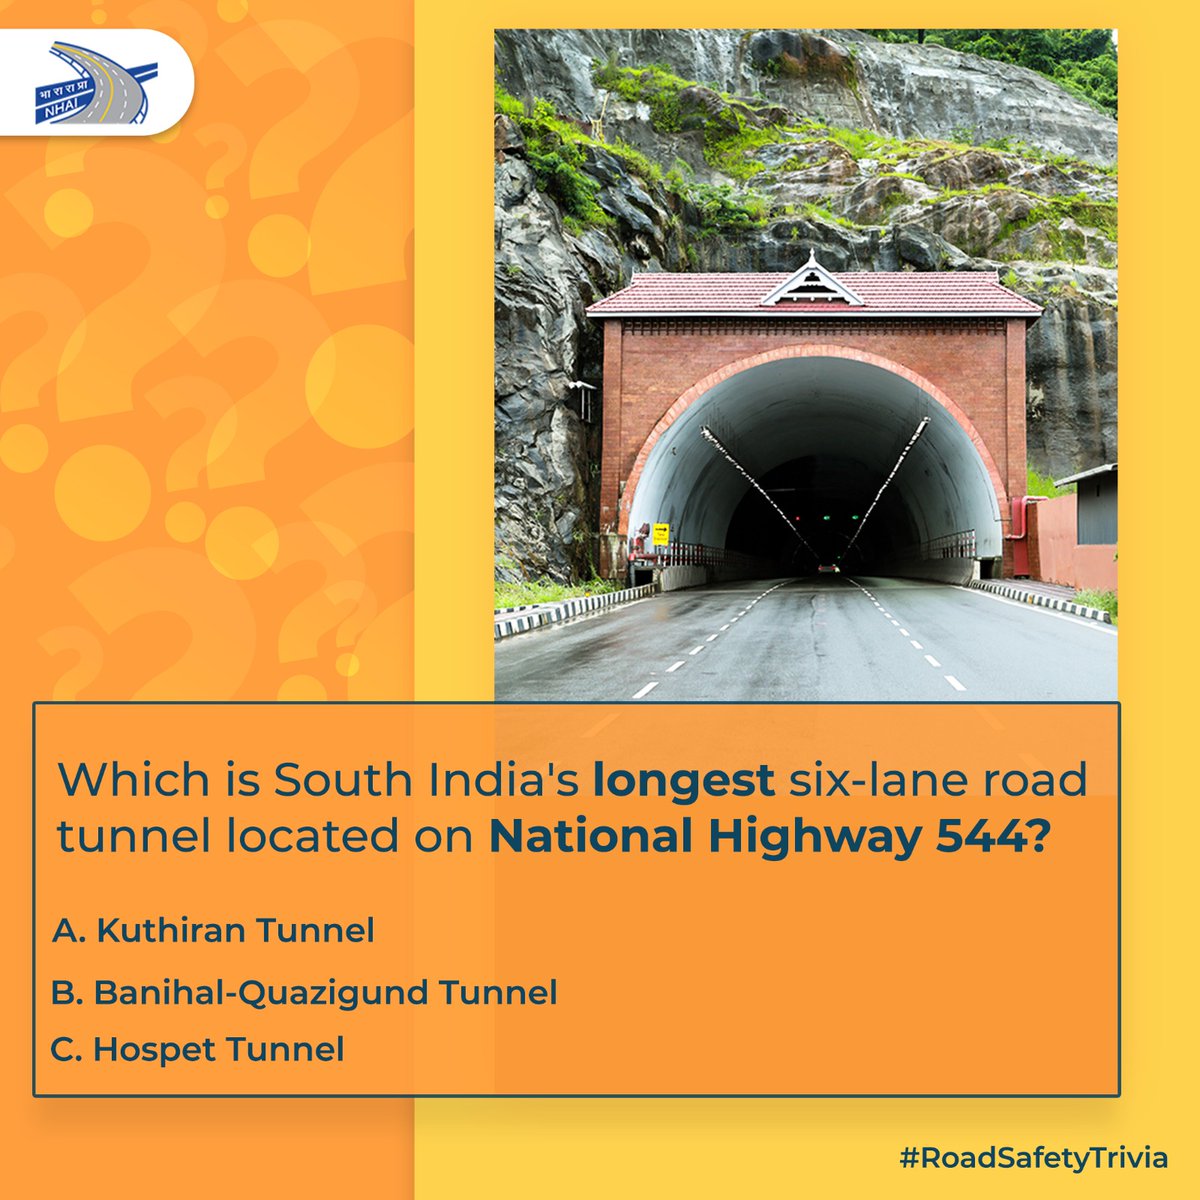 Identify the 1.6 km long twin-tube Southern India's longest 6-lane road tunnel which has reduced travel time and provided easier access to tourist and religious places in the state. Share your answer in the comments section below! #NHAI #BuildingANation